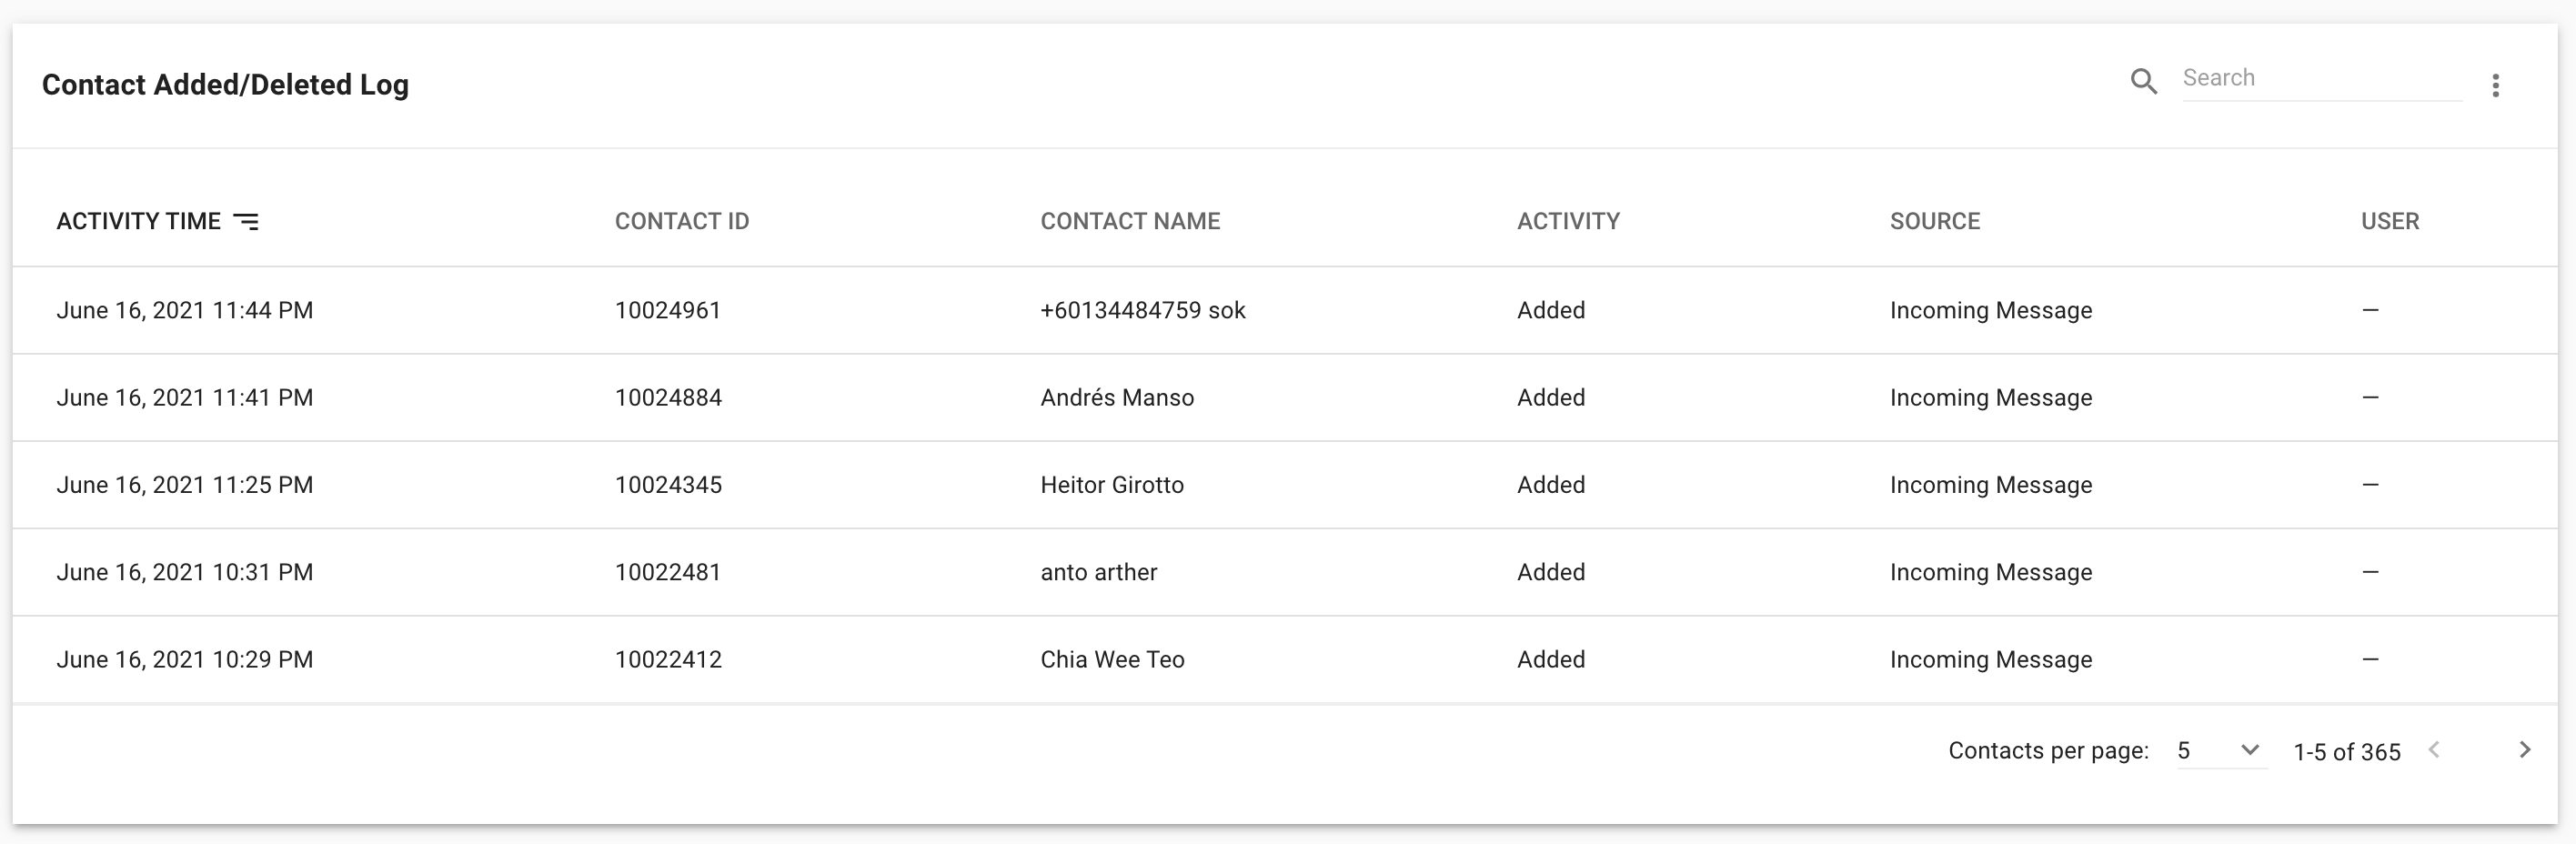 screenshot of contacts added/deleted log